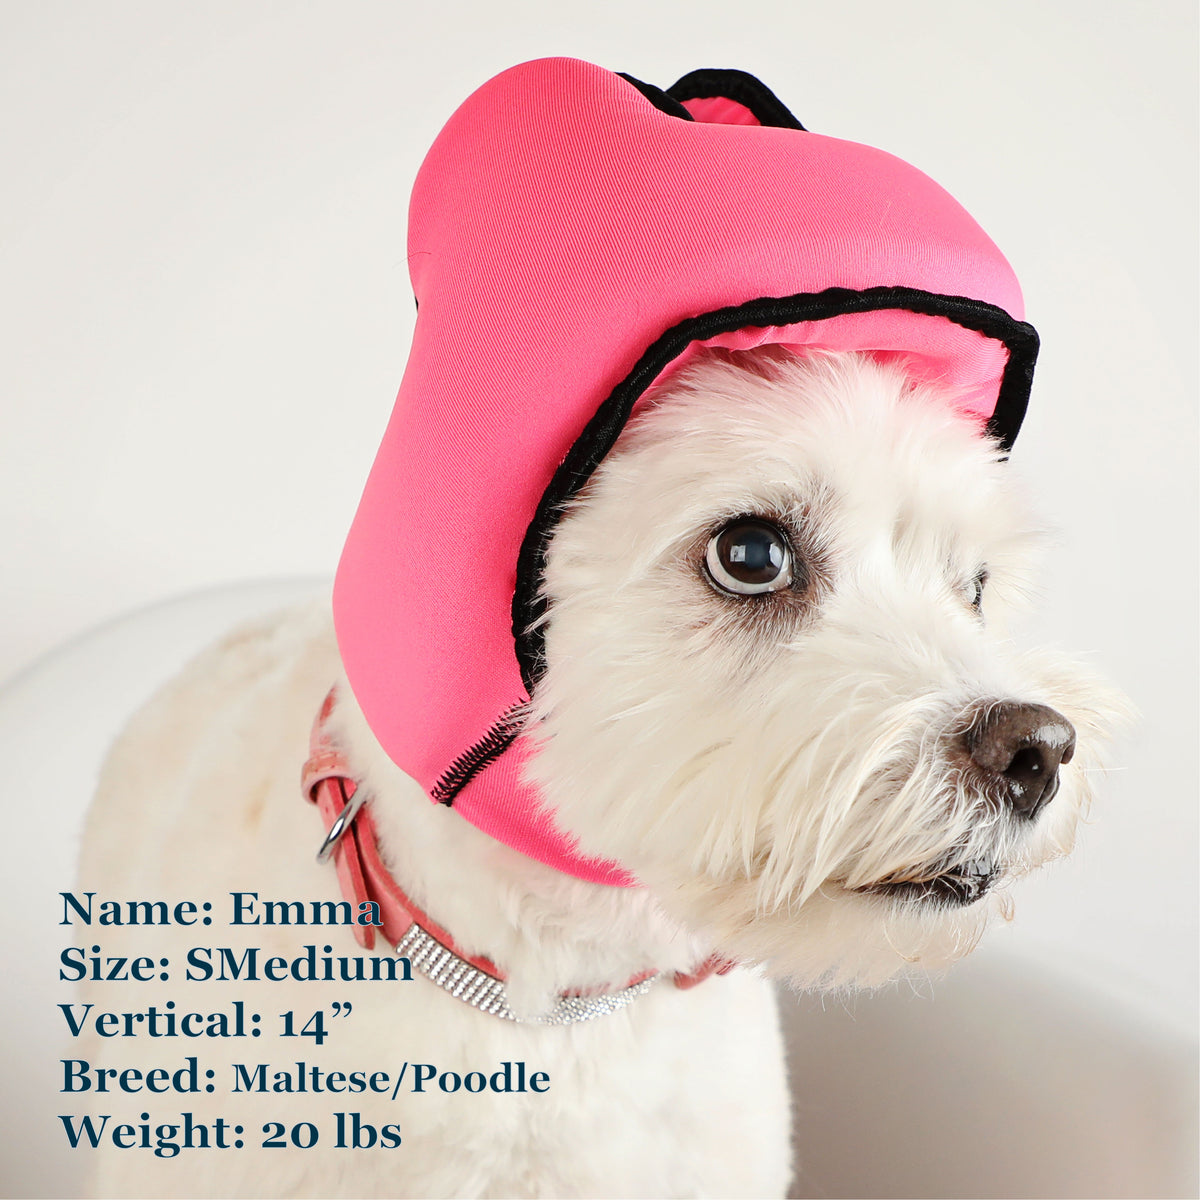 Emma is a Maltese Poodle Mix in a SMedium Pink PAWNIX Noise Cancelling Headset for dogs